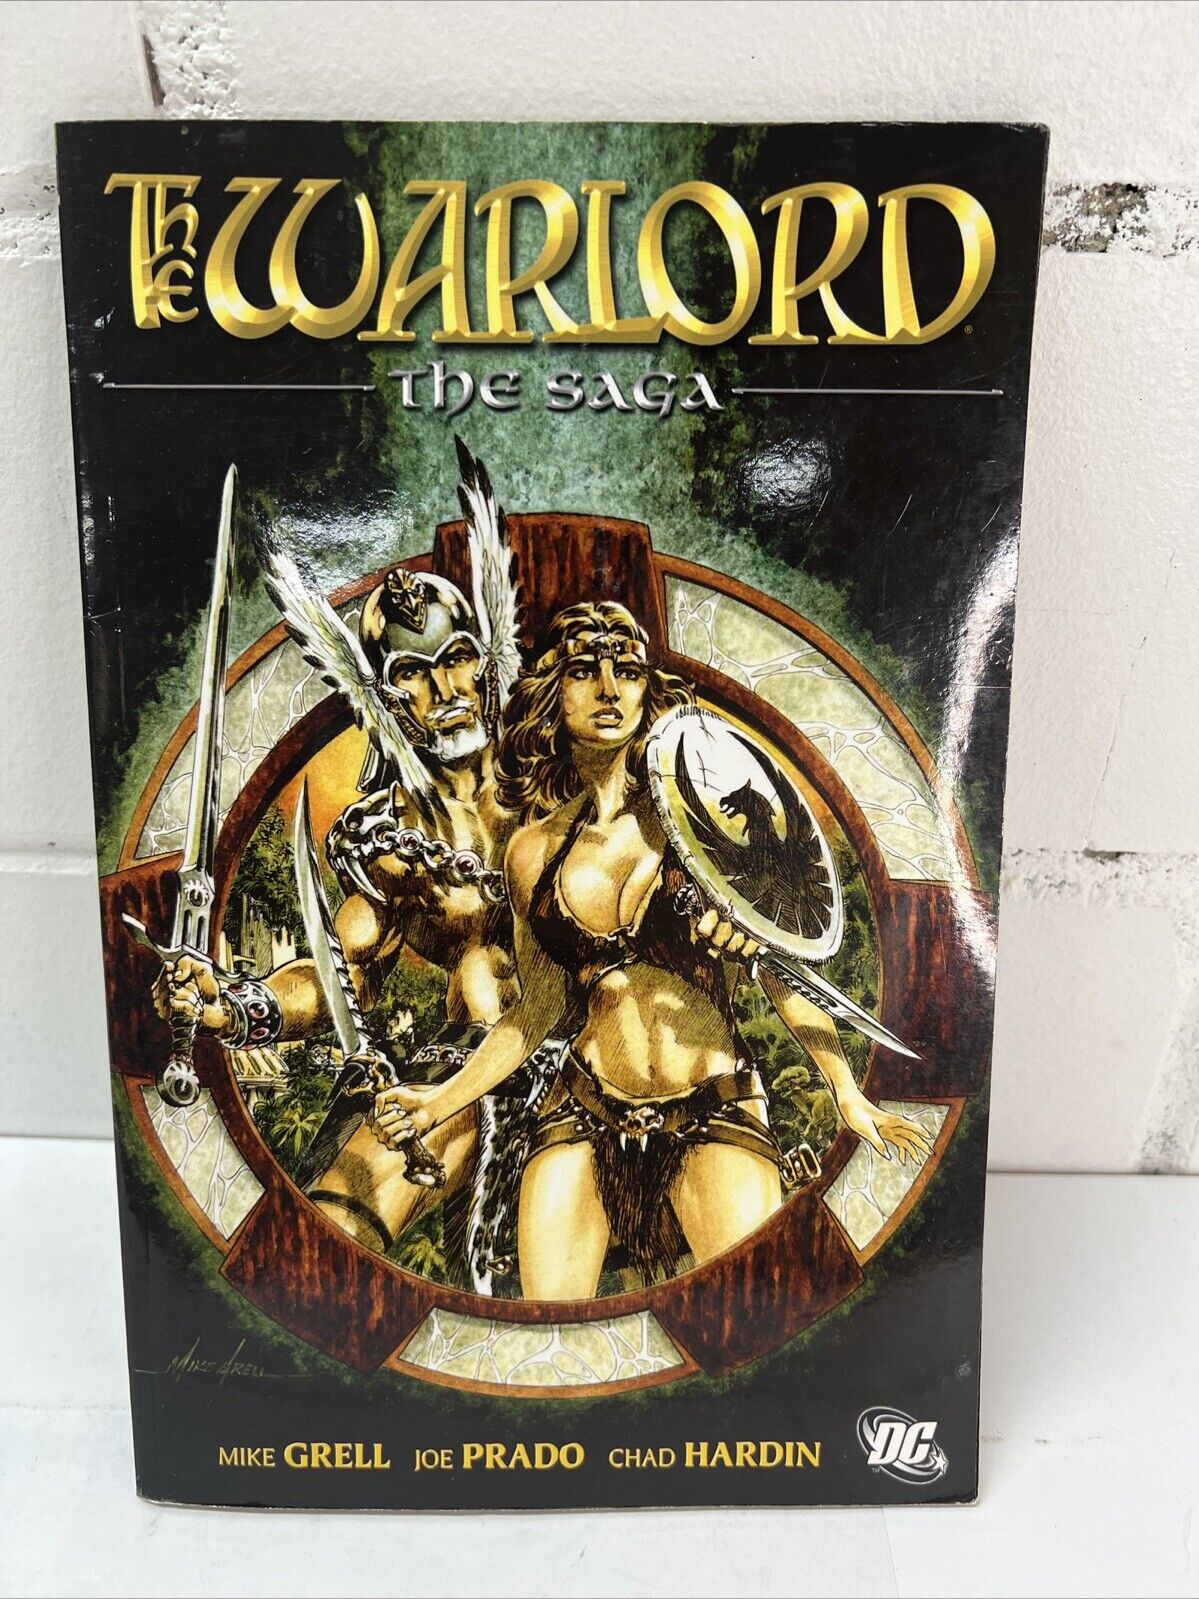 Rare The Warlord: The Saga Grell, Mike Paperback Good Condition 